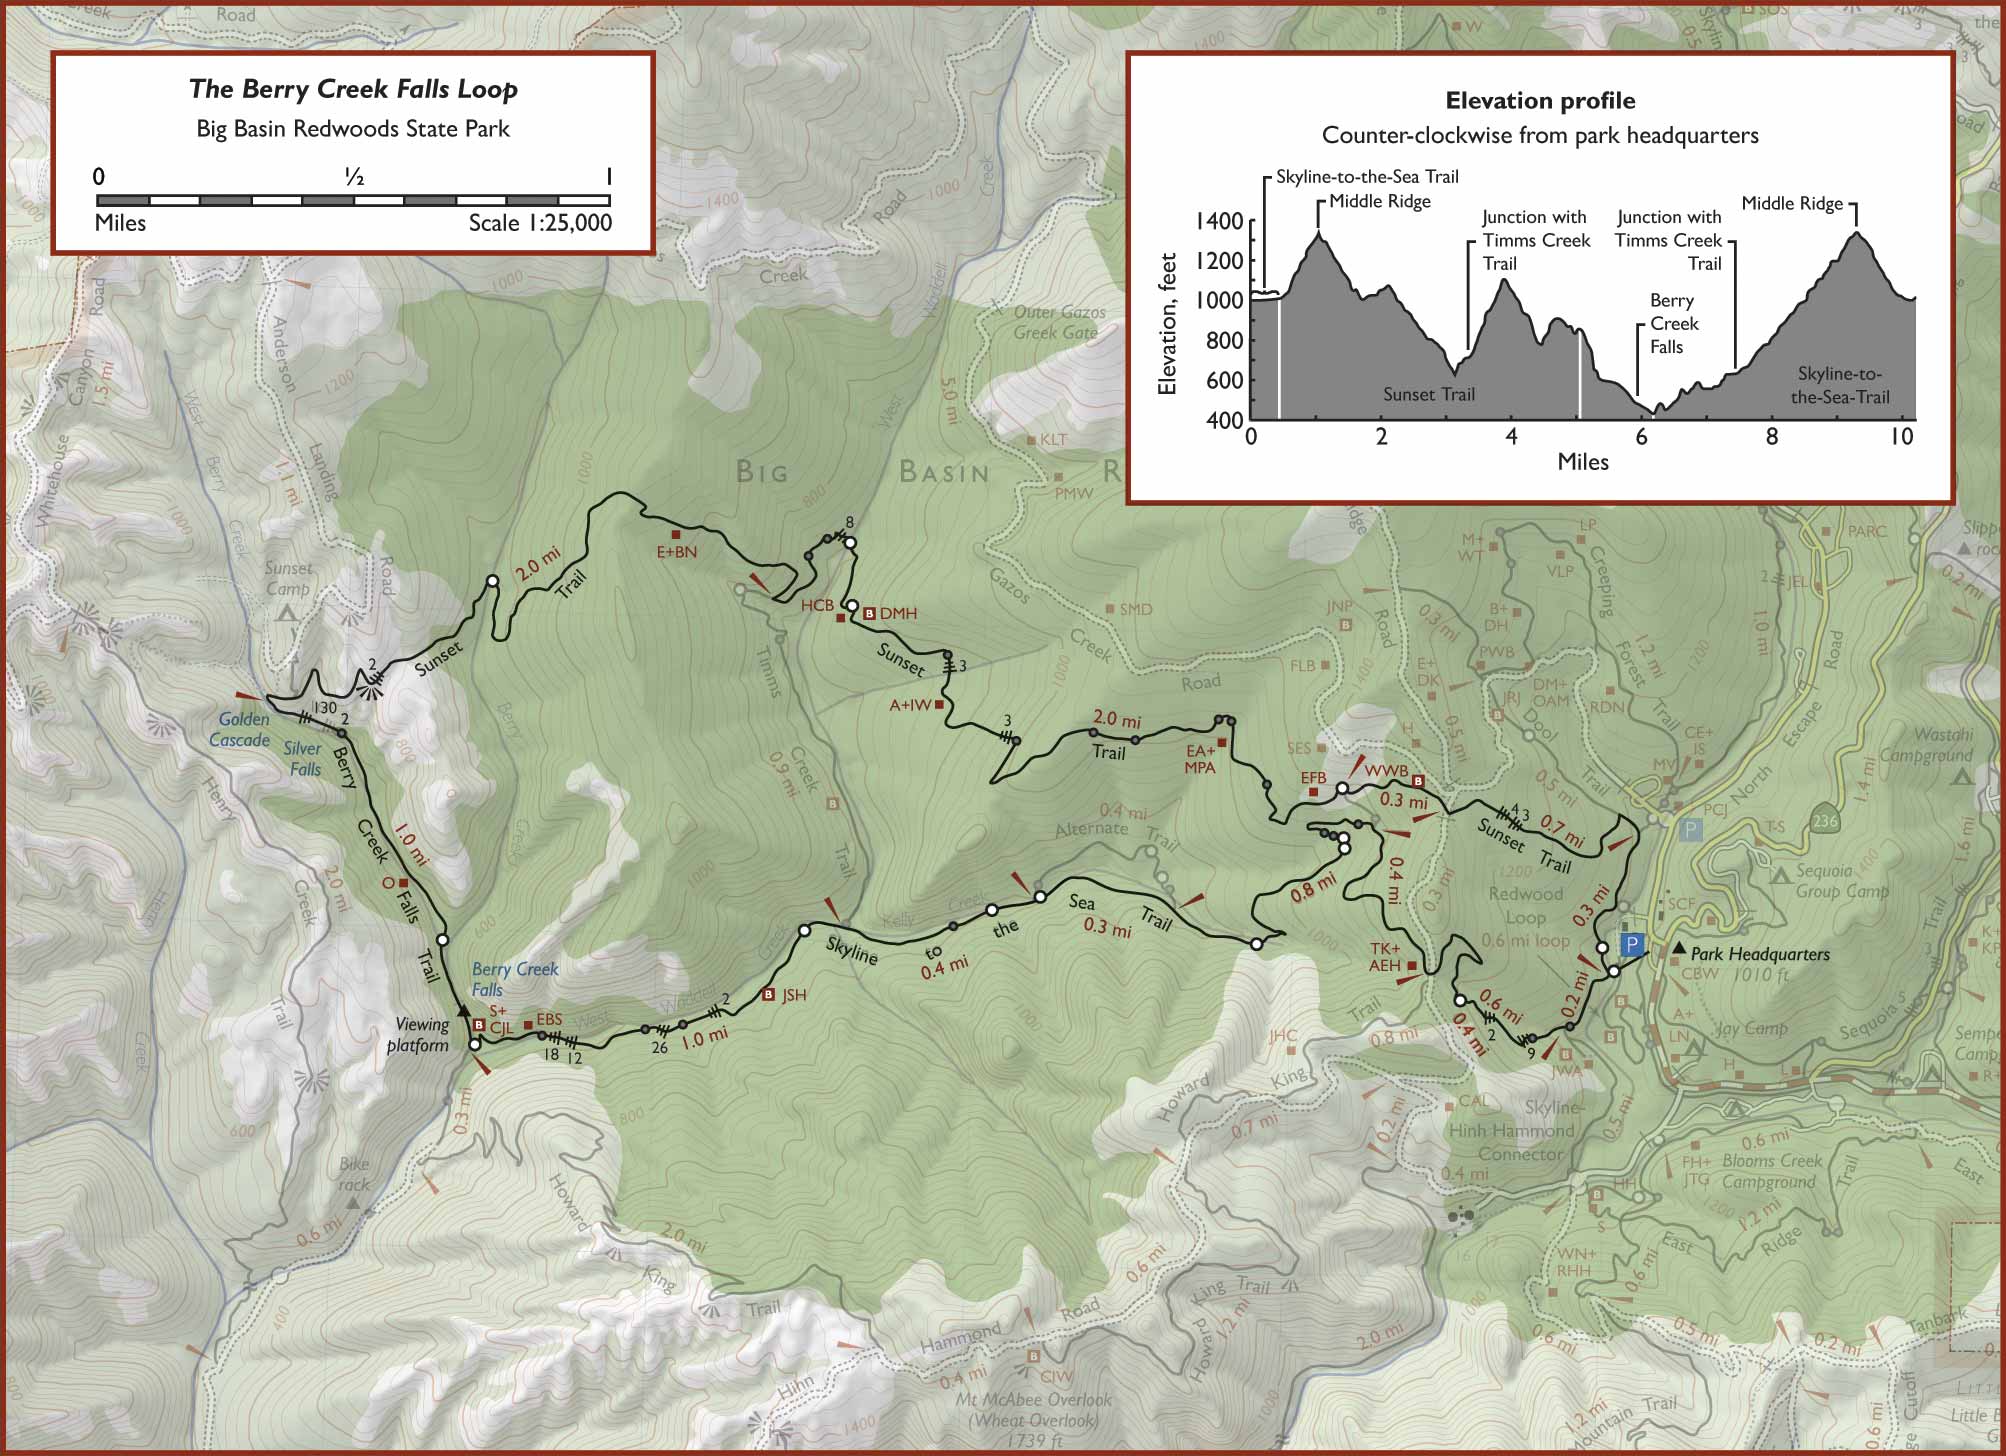 Topographic map of the Berry Creek Loop, Big Basin Redwoods State Park